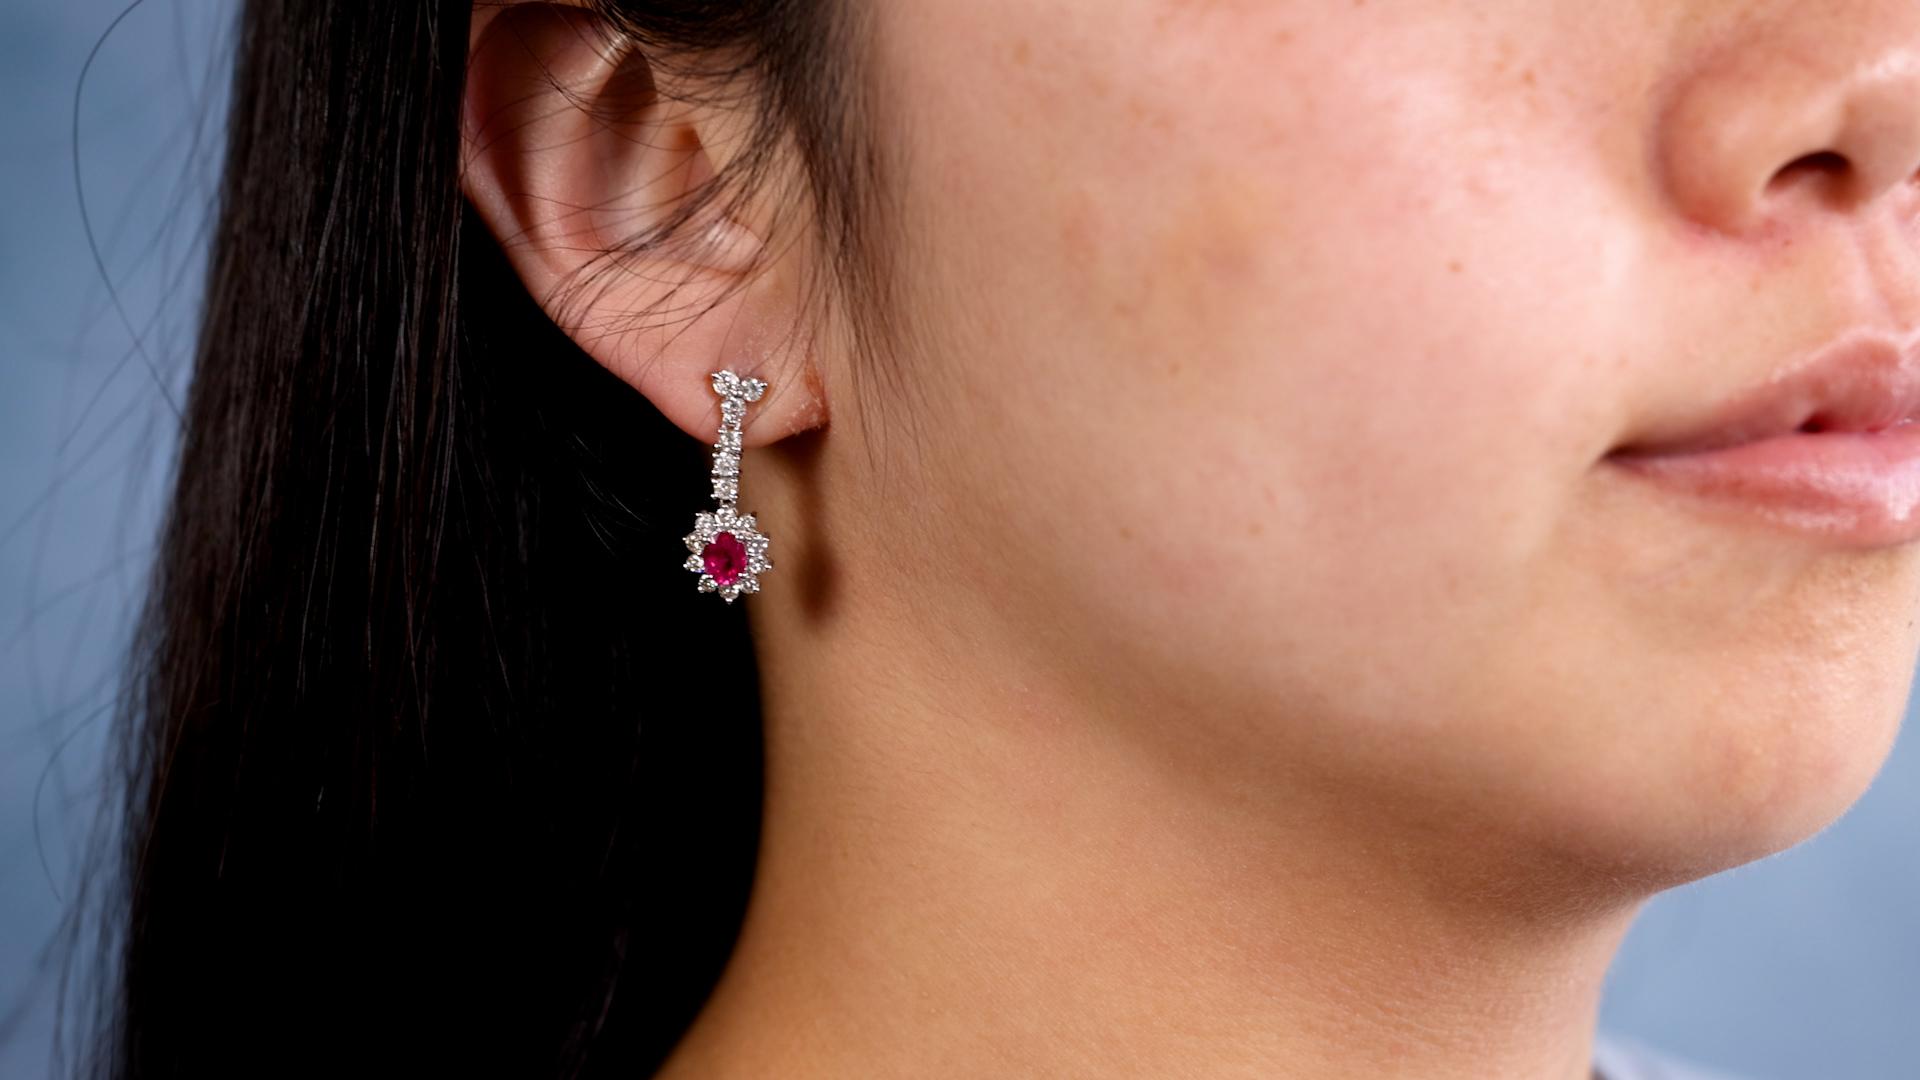 One Pair of Vintage Ruby Diamond 18k White Gold Drop Earrings. Featuring two oval mixed cut rubies with a total weight of 1.50 carats. Accented by 32 round brilliant cut diamonds with a total weight of 1.02 carats, graded H-I color, VS-SI clarity.